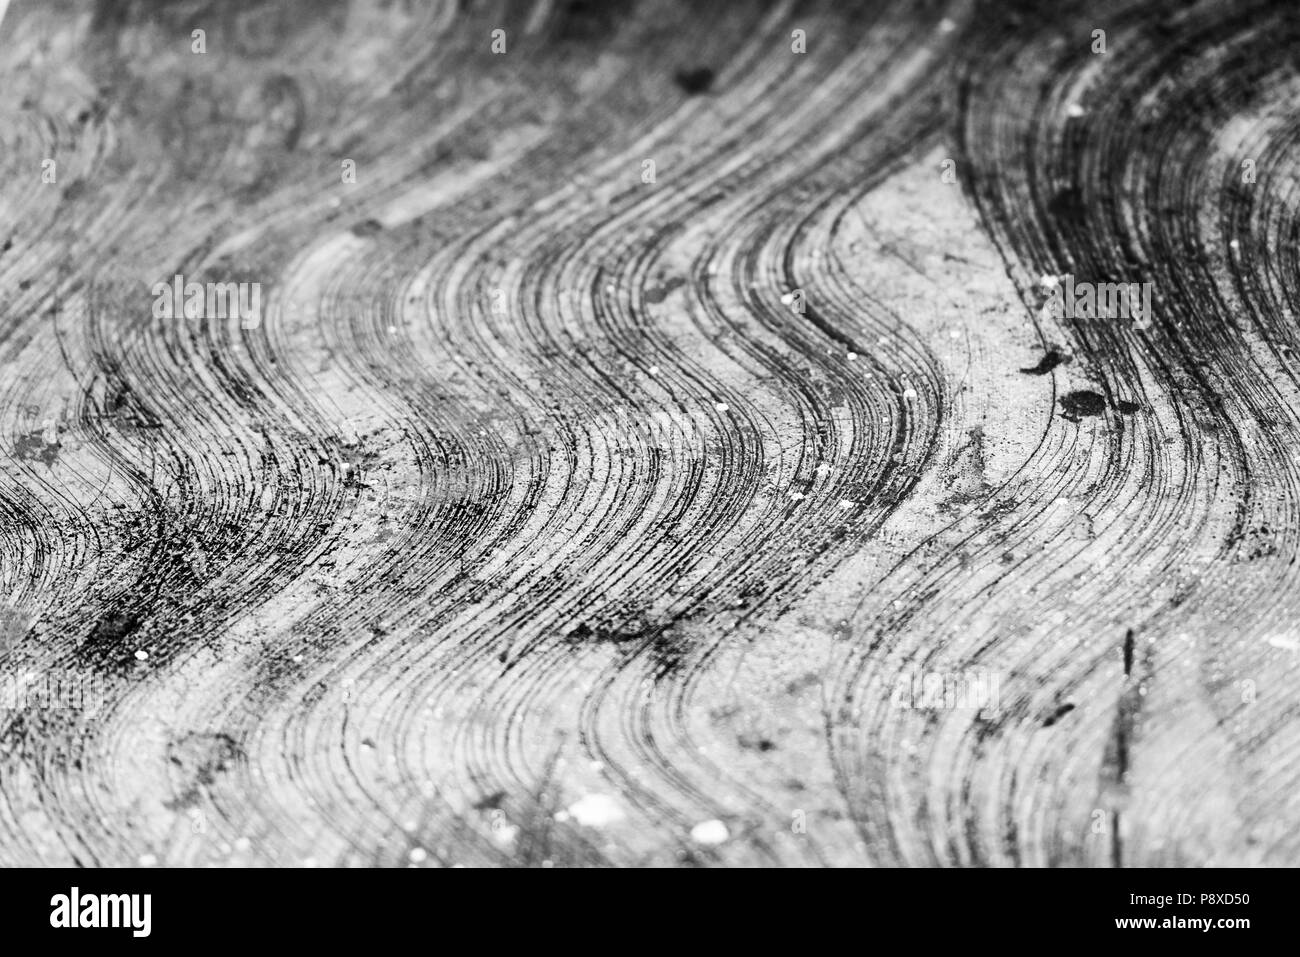 Concrete floor with curved patterns and stains in black and white Stock Photo